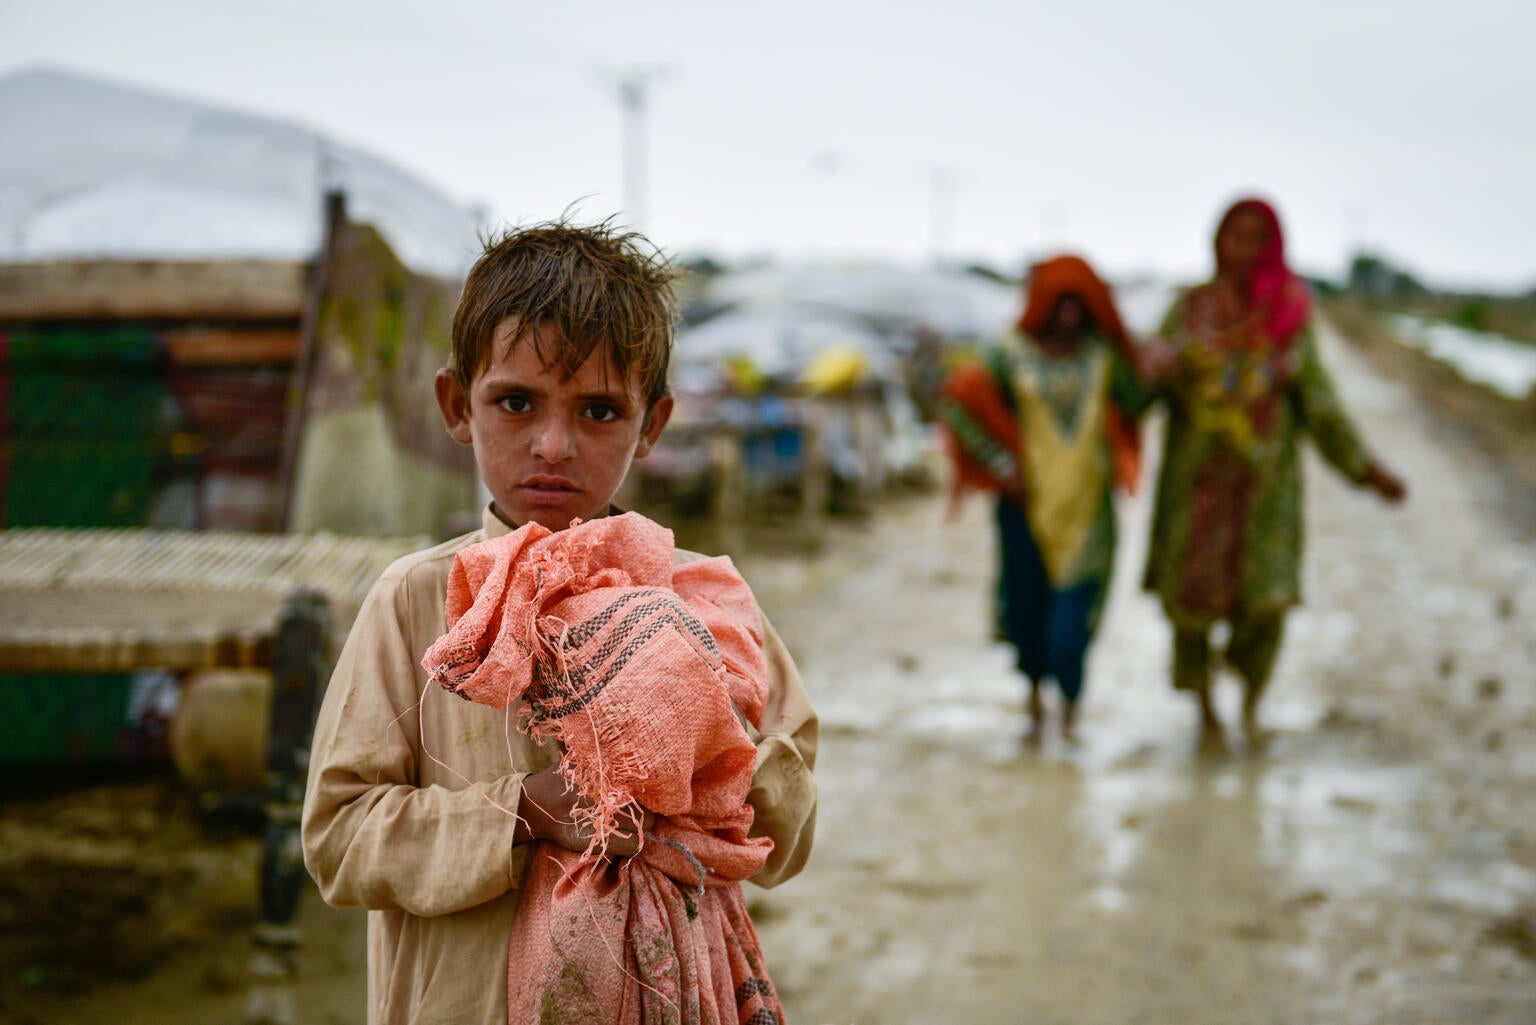 A boy is carrying his belongings after evacuating from the floods in Pakistan